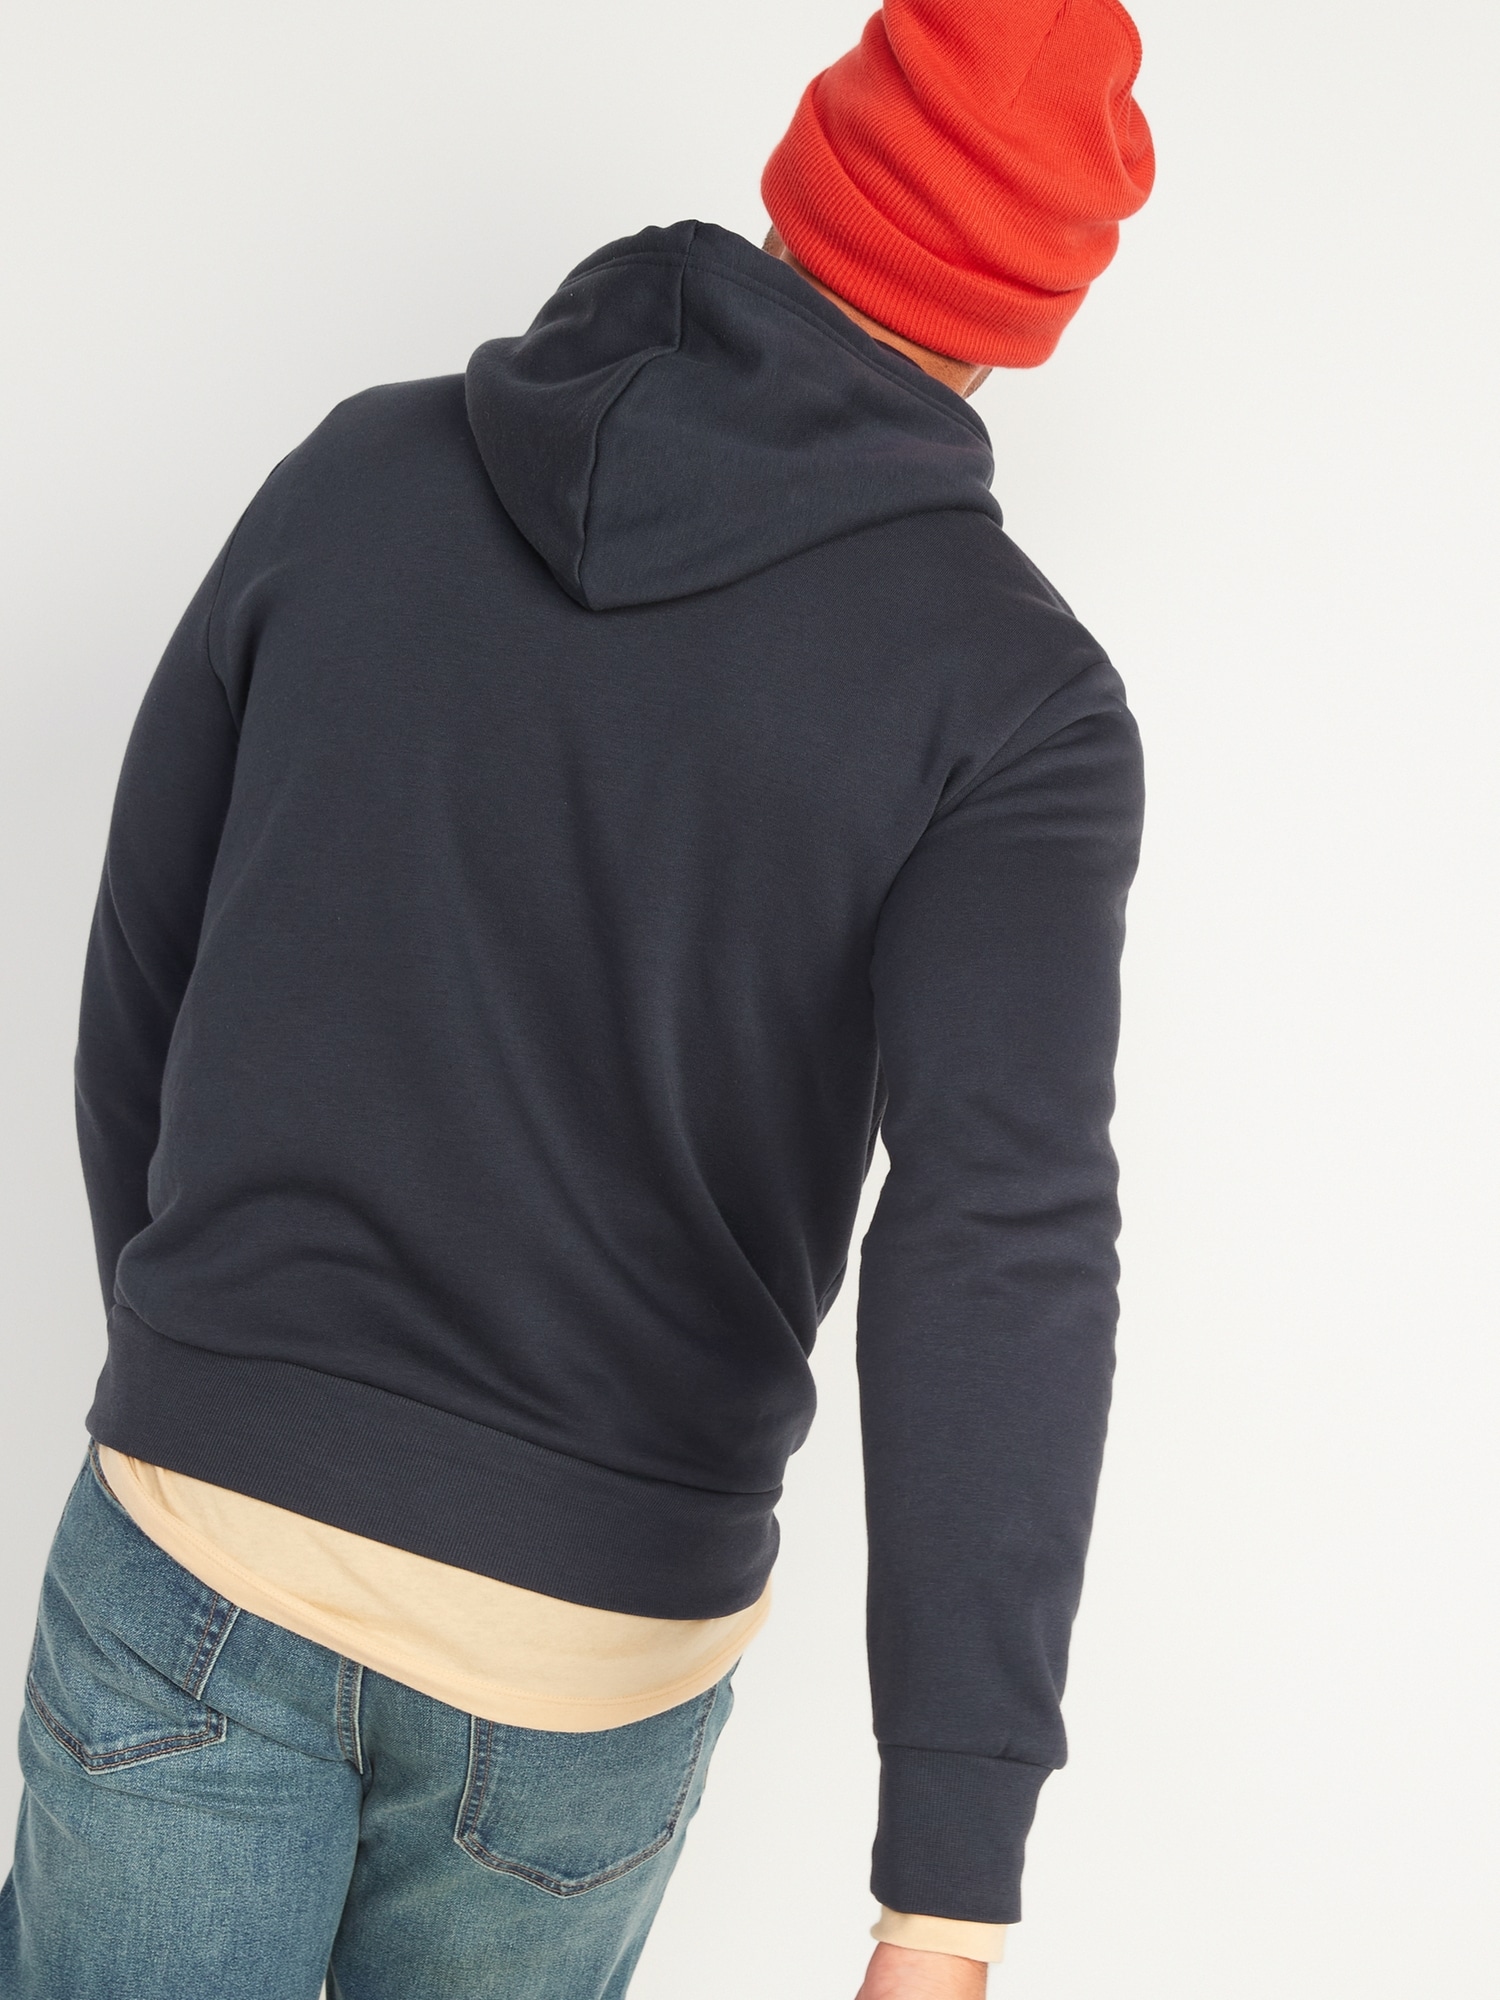 Classic Pullover Hoodie for Old Navy Men 